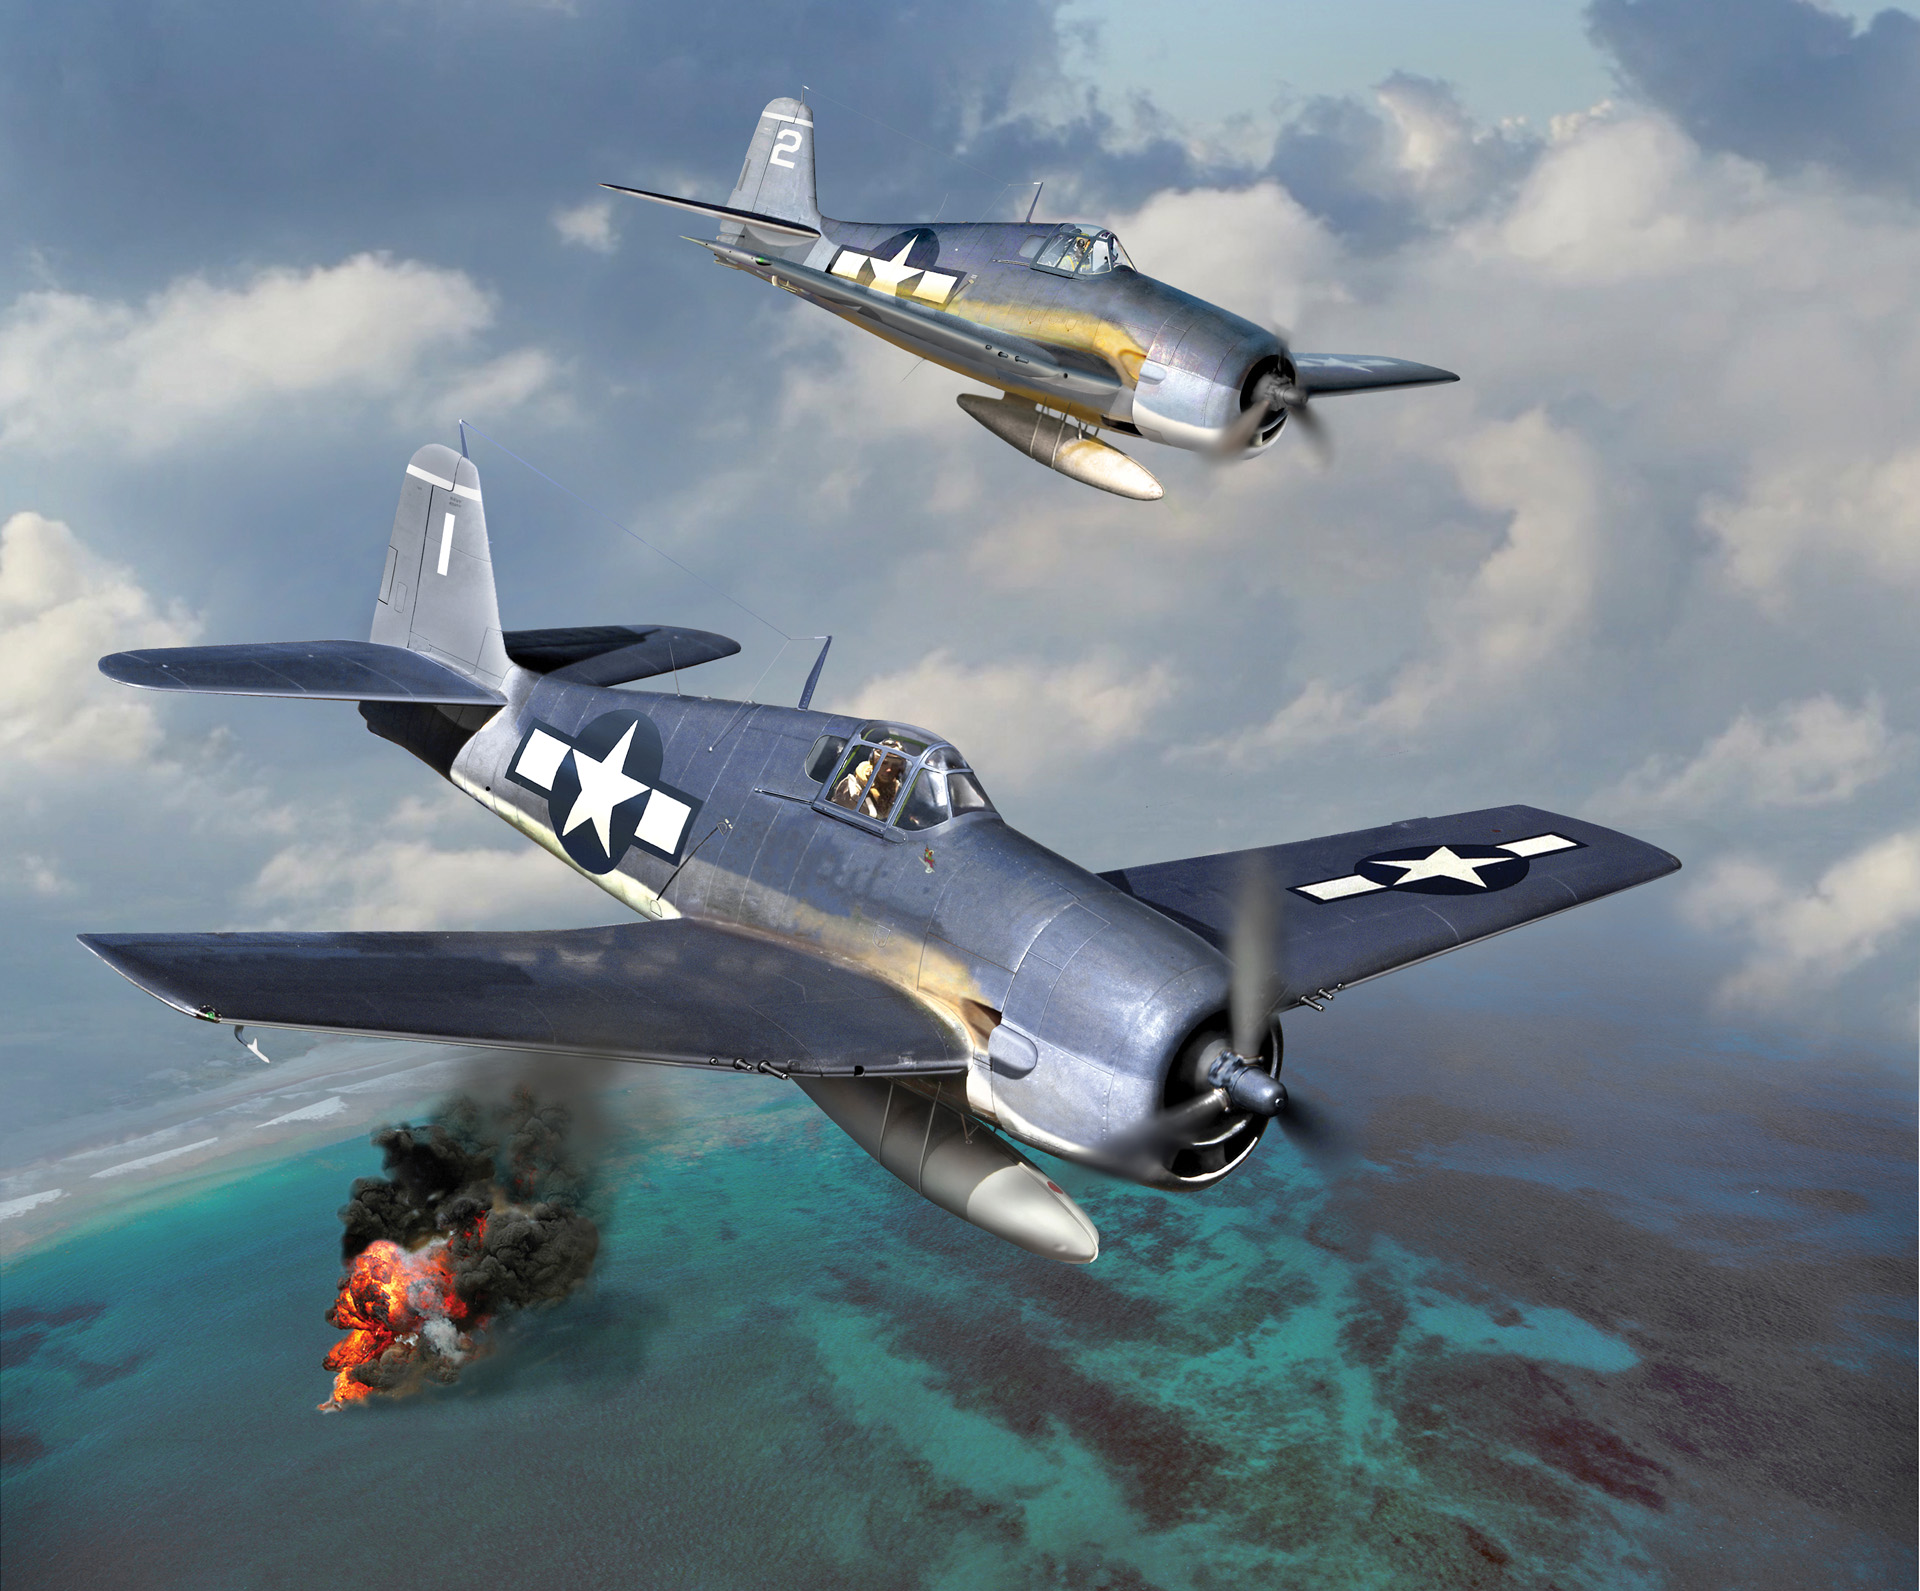 Lieutenant Commander Eddie C. Outlaw and his wingman, Lieutenant (j.g.) Donald ‘Dagwood’ Reeves, wing over Truk Lagoon during their destructive April 1944 fighter sweep. A Japanese fighter, shot down in flames, has just hit the water and exploded on impact. The pilots took their Grumman F6F Hellcat fighters into action without dropping their auxiliary fuel tanks, which are prominently visible in this painting by artist Jack Fellows.